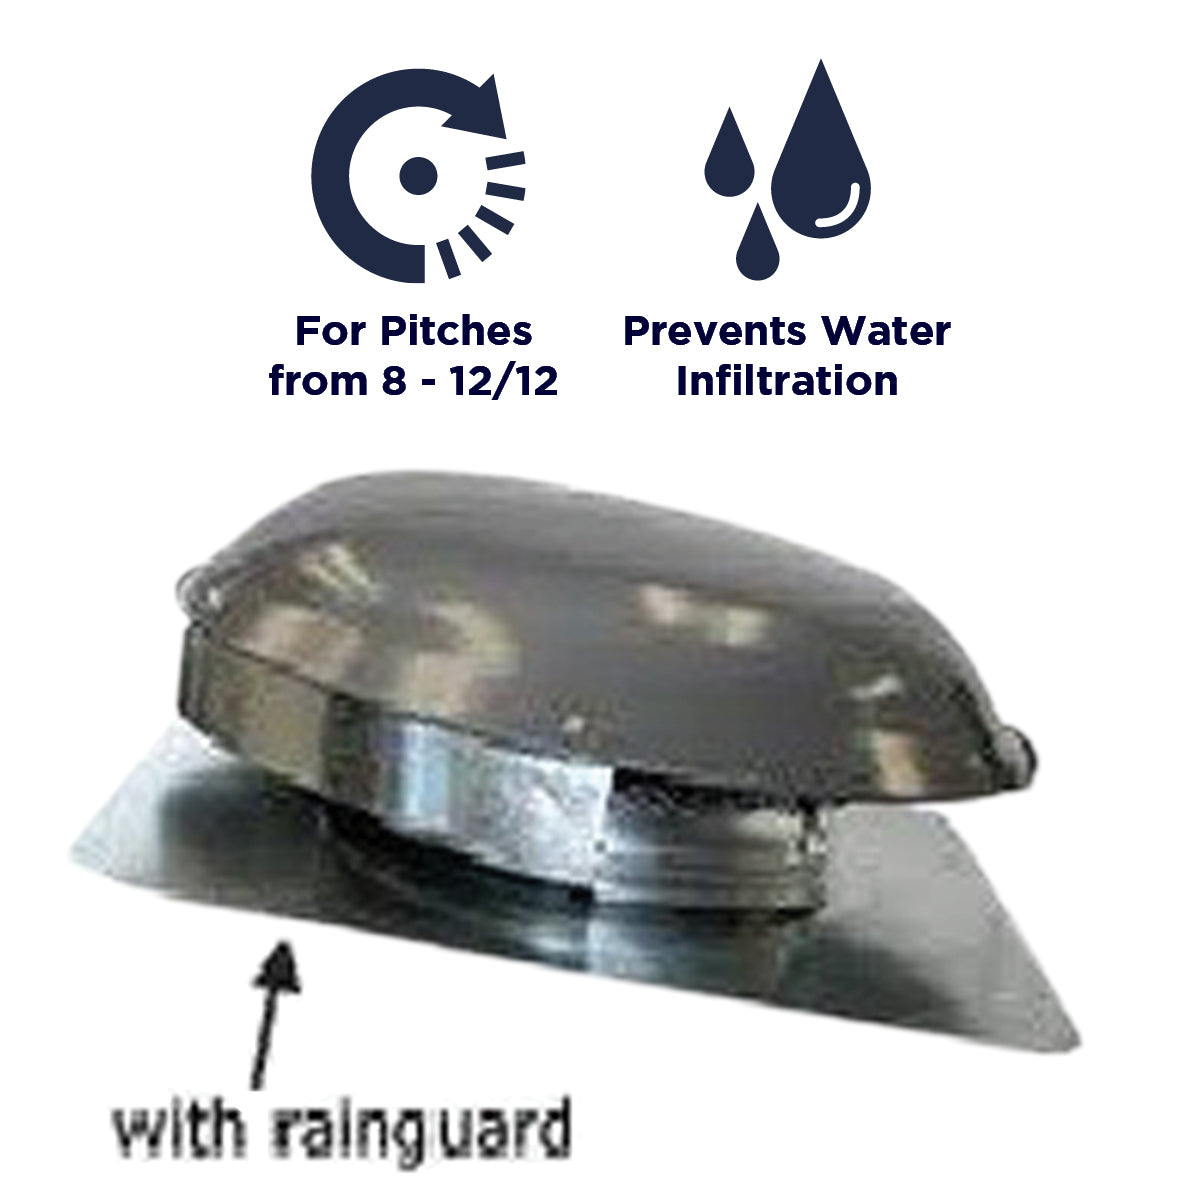 The XXRAINGUARD should be used on power attic vents installed on a roof pitch between 8 - 12/12, and prevents water infiltration.